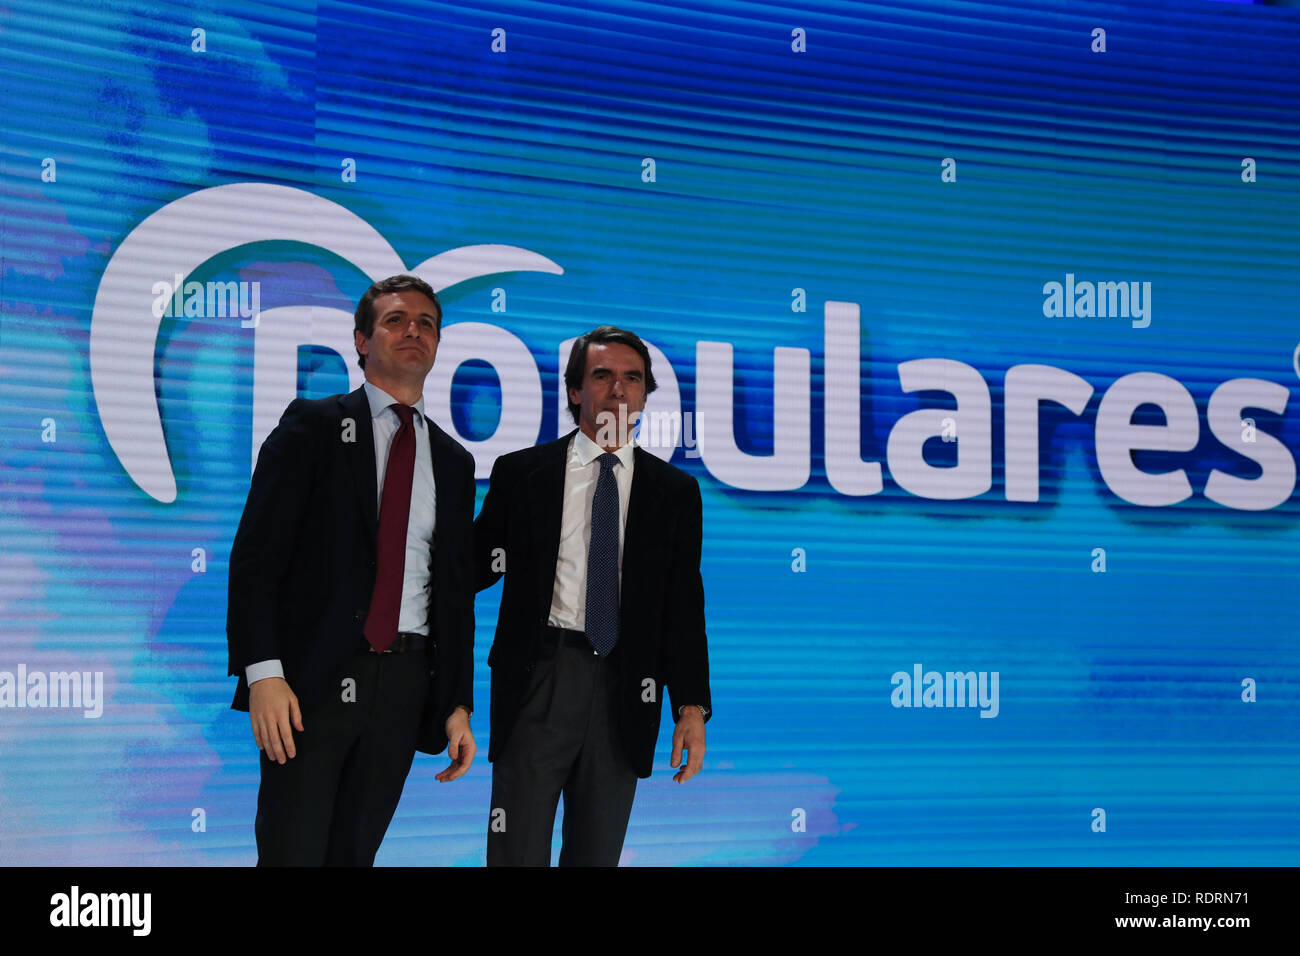 Madrid, Spain. 19th Jan 2019. Pablo Casado and Jose Maria Aznar receiving the applause from the audience. The PP celebrates its national convention to establish the main lines of its electoral program for the three elections scheduled for May 26 and are key to gauge the leadership of the popular president, Pablo Casado Credit: Jesús Hellin/Alamy Live News Stock Photo